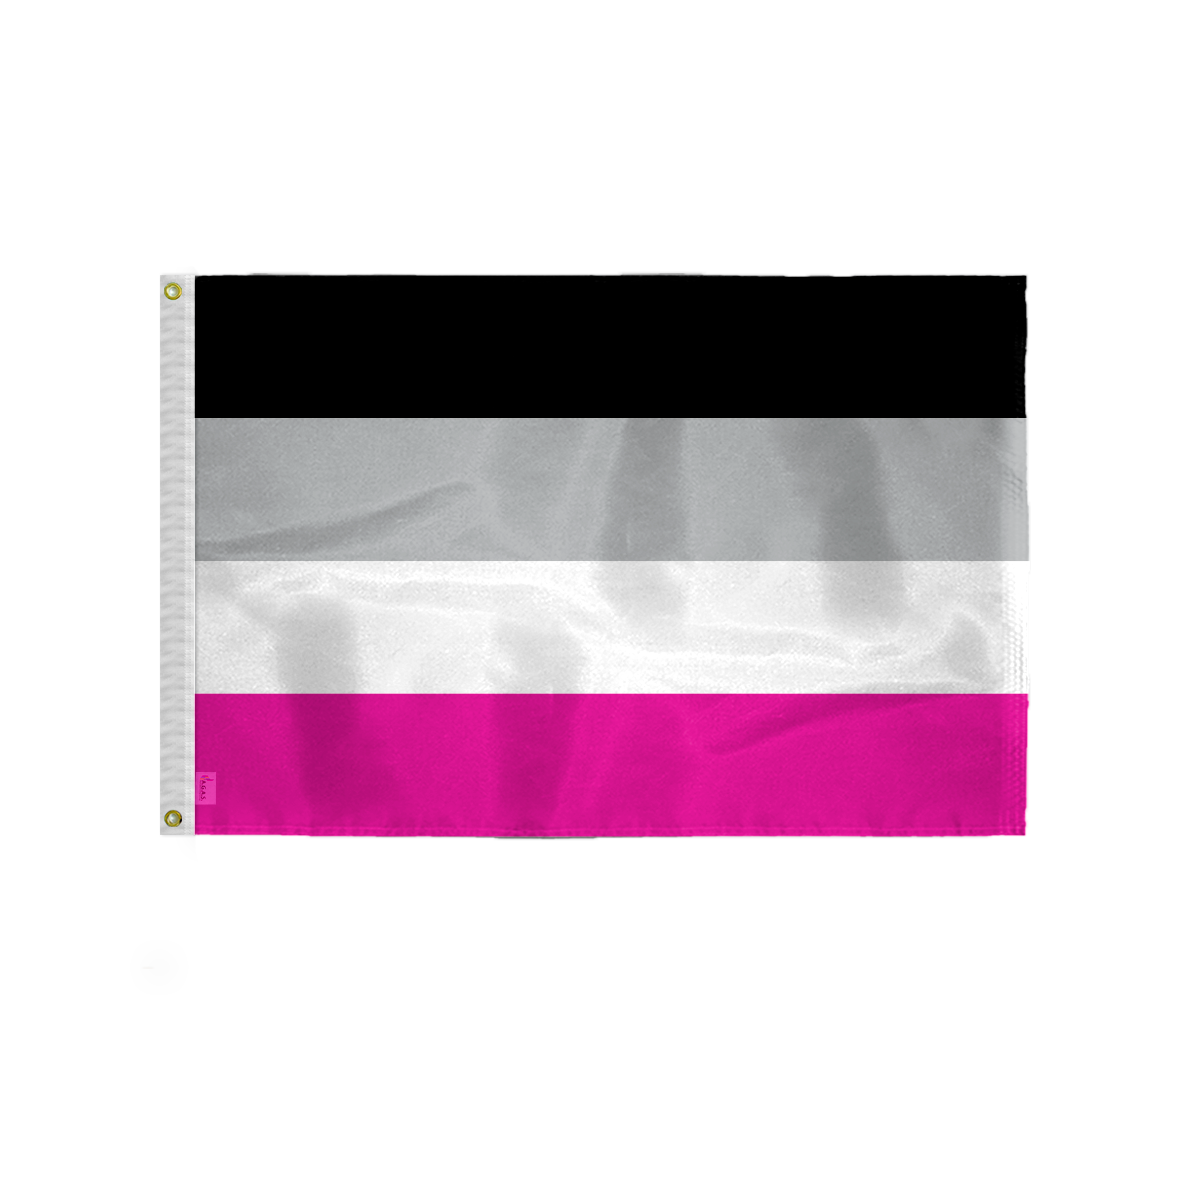 AGAS Gynephilia Pride Flag 2x3 Ft - Double Sided Printed 200D Nylon